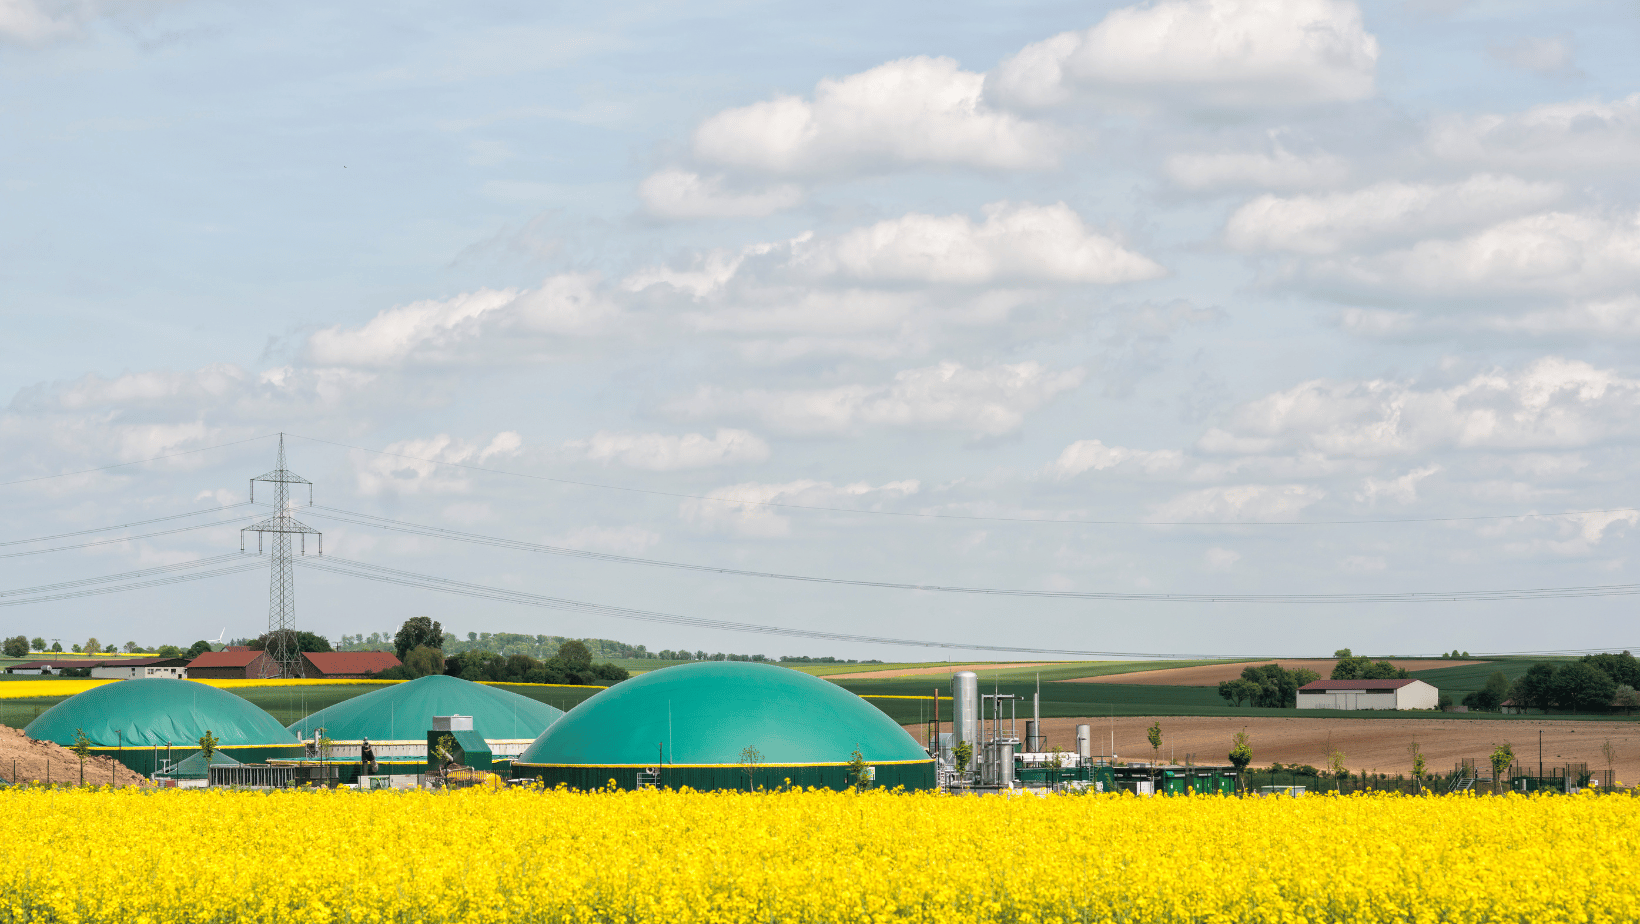 Results from ALFA’s citizens and stakeholder surveys on biogas perceptions and challenges